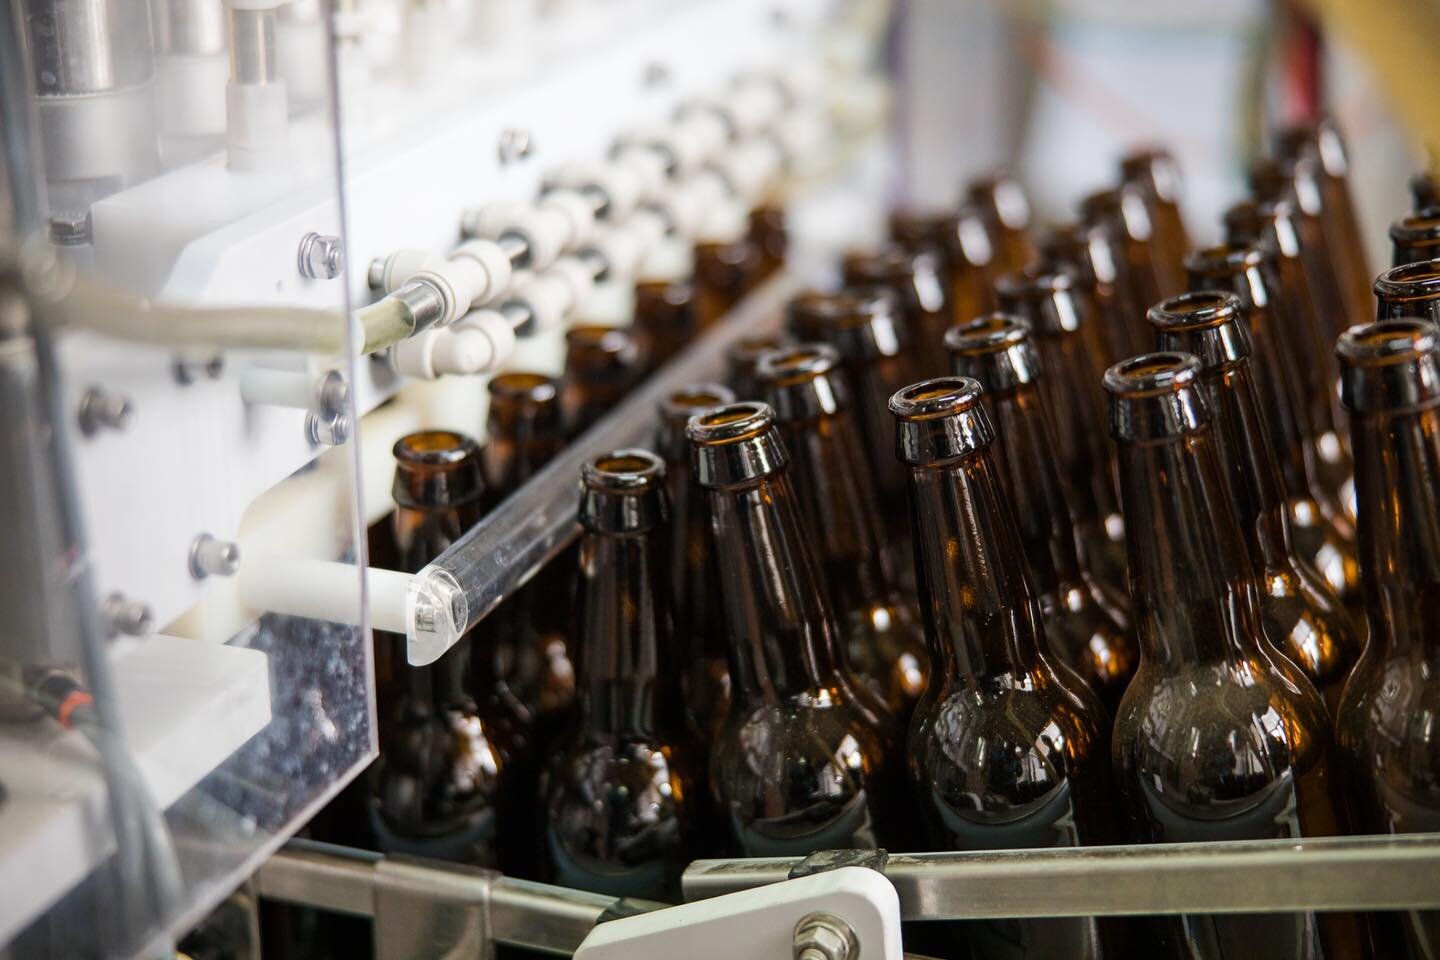 Bottling at Cederberg Brewery is a meticulous process and involves filling, capping, and labelling the bottles with precision and care to ensure that each one meets the highest quality standards. 

From the moment the bottles are filled with the deli